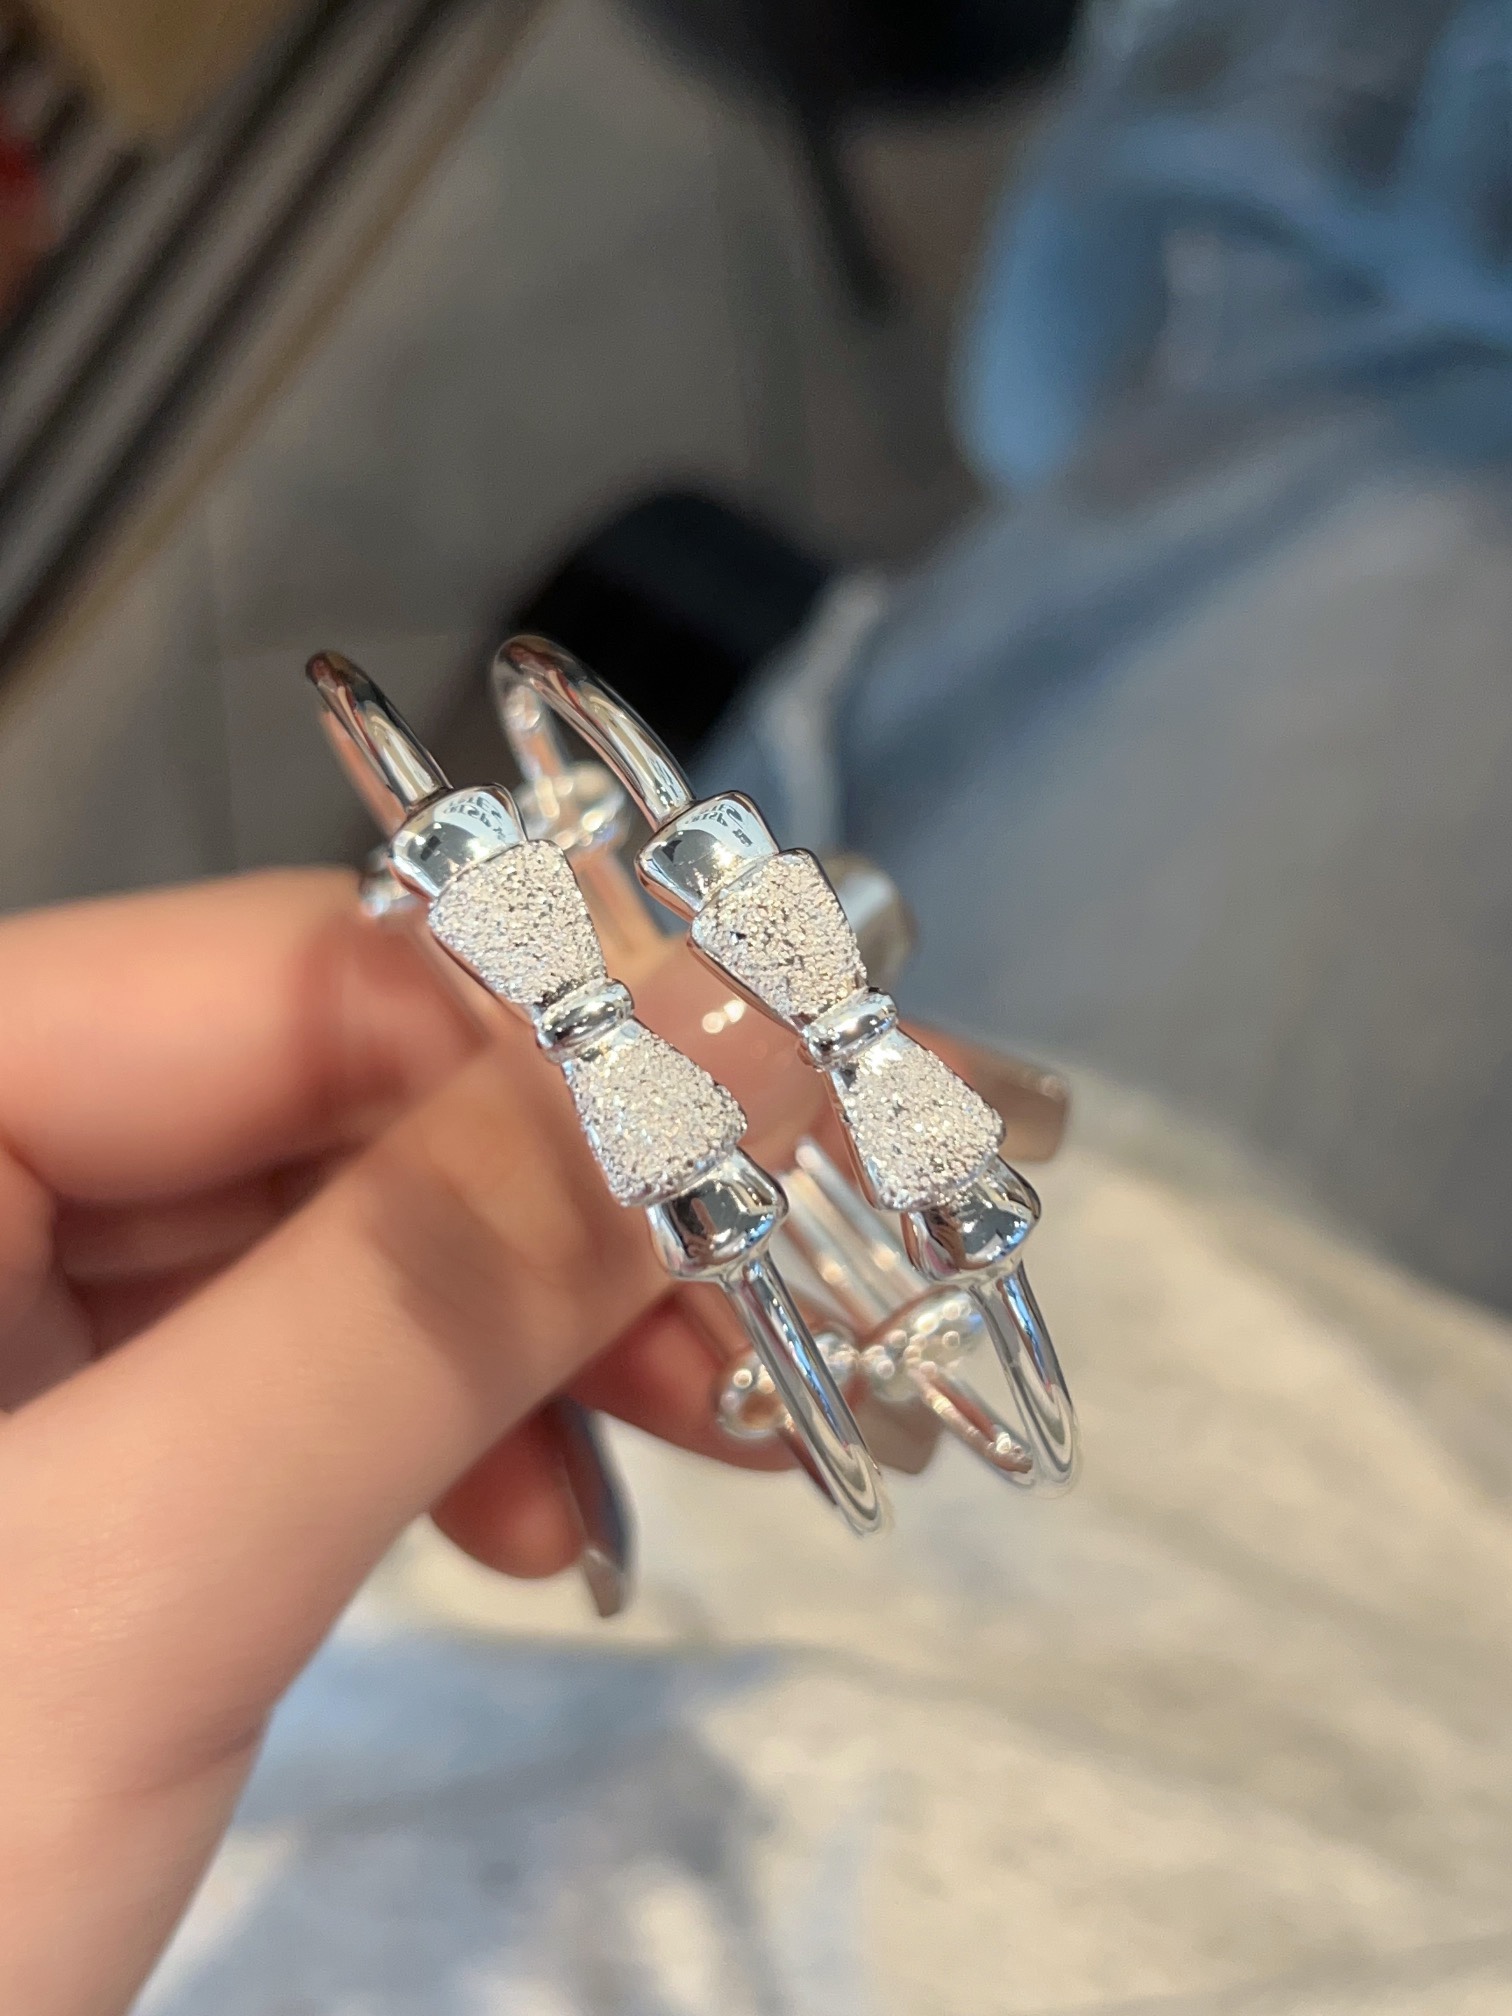 Hong Kong is giving birth to a silver 999 sweet and small fresh middle child bracelet frosted butterfly knot pure silver bracelet baby ornament-Taobao